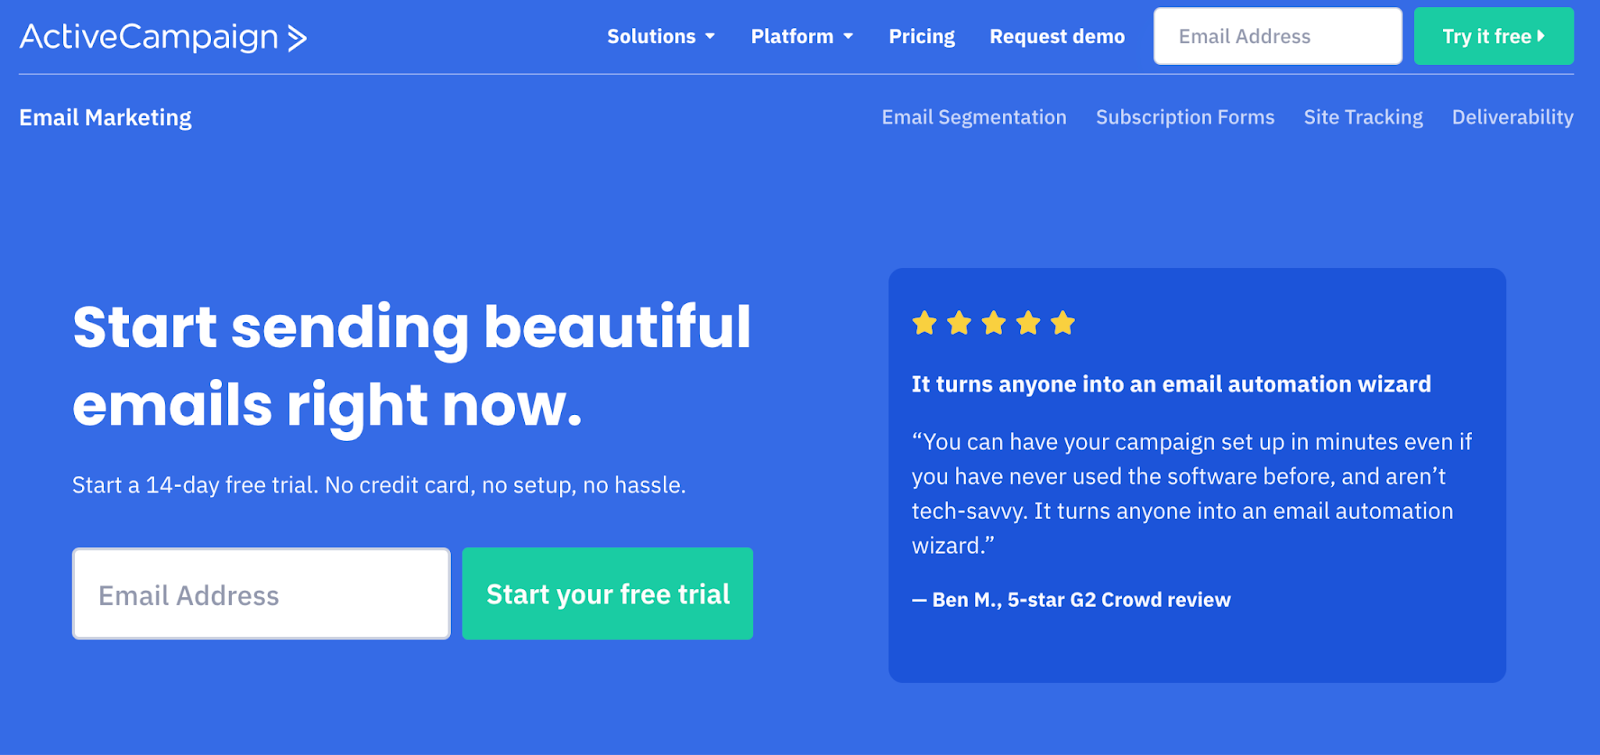 ActiveCampaign’s Featured Product Review SaaS copywriting